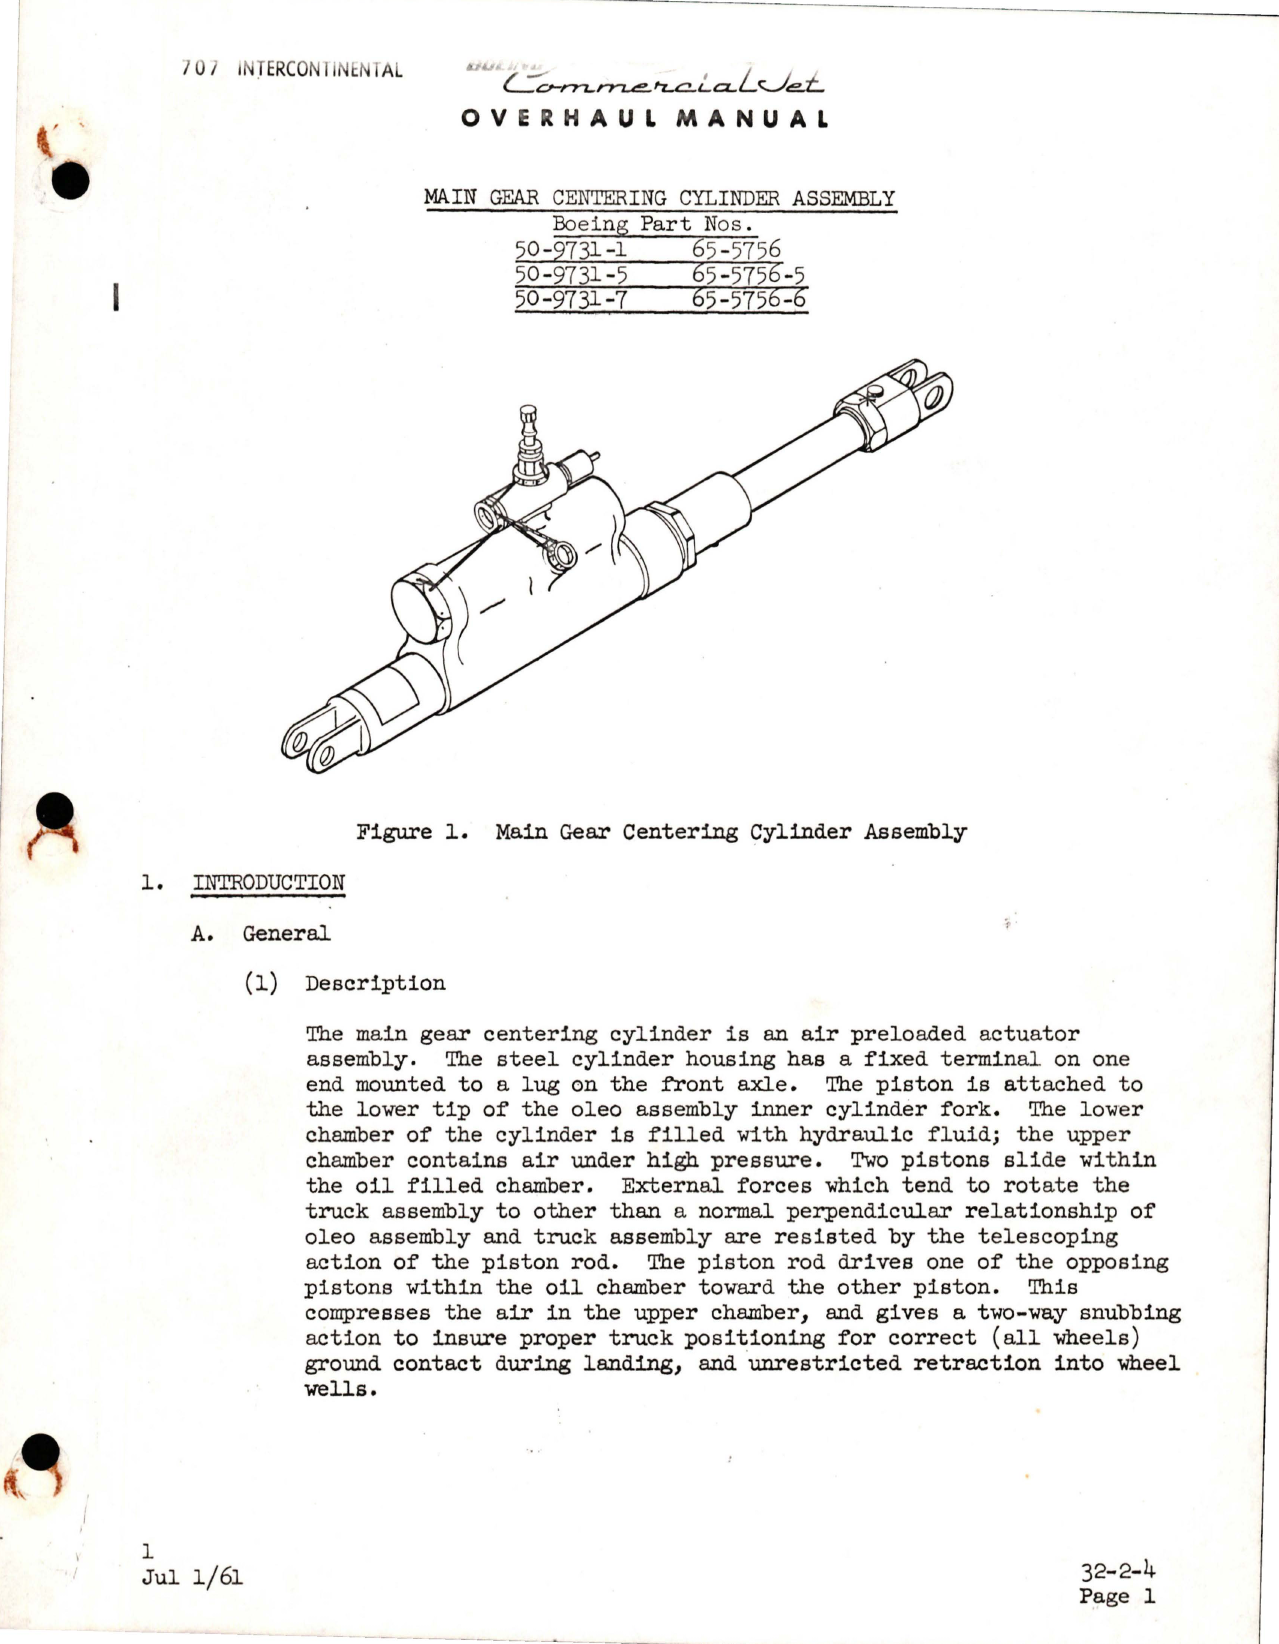 Sample page 1 from AirCorps Library document: Overhaul Manual for Main Gear Centering Cylinder Assembly